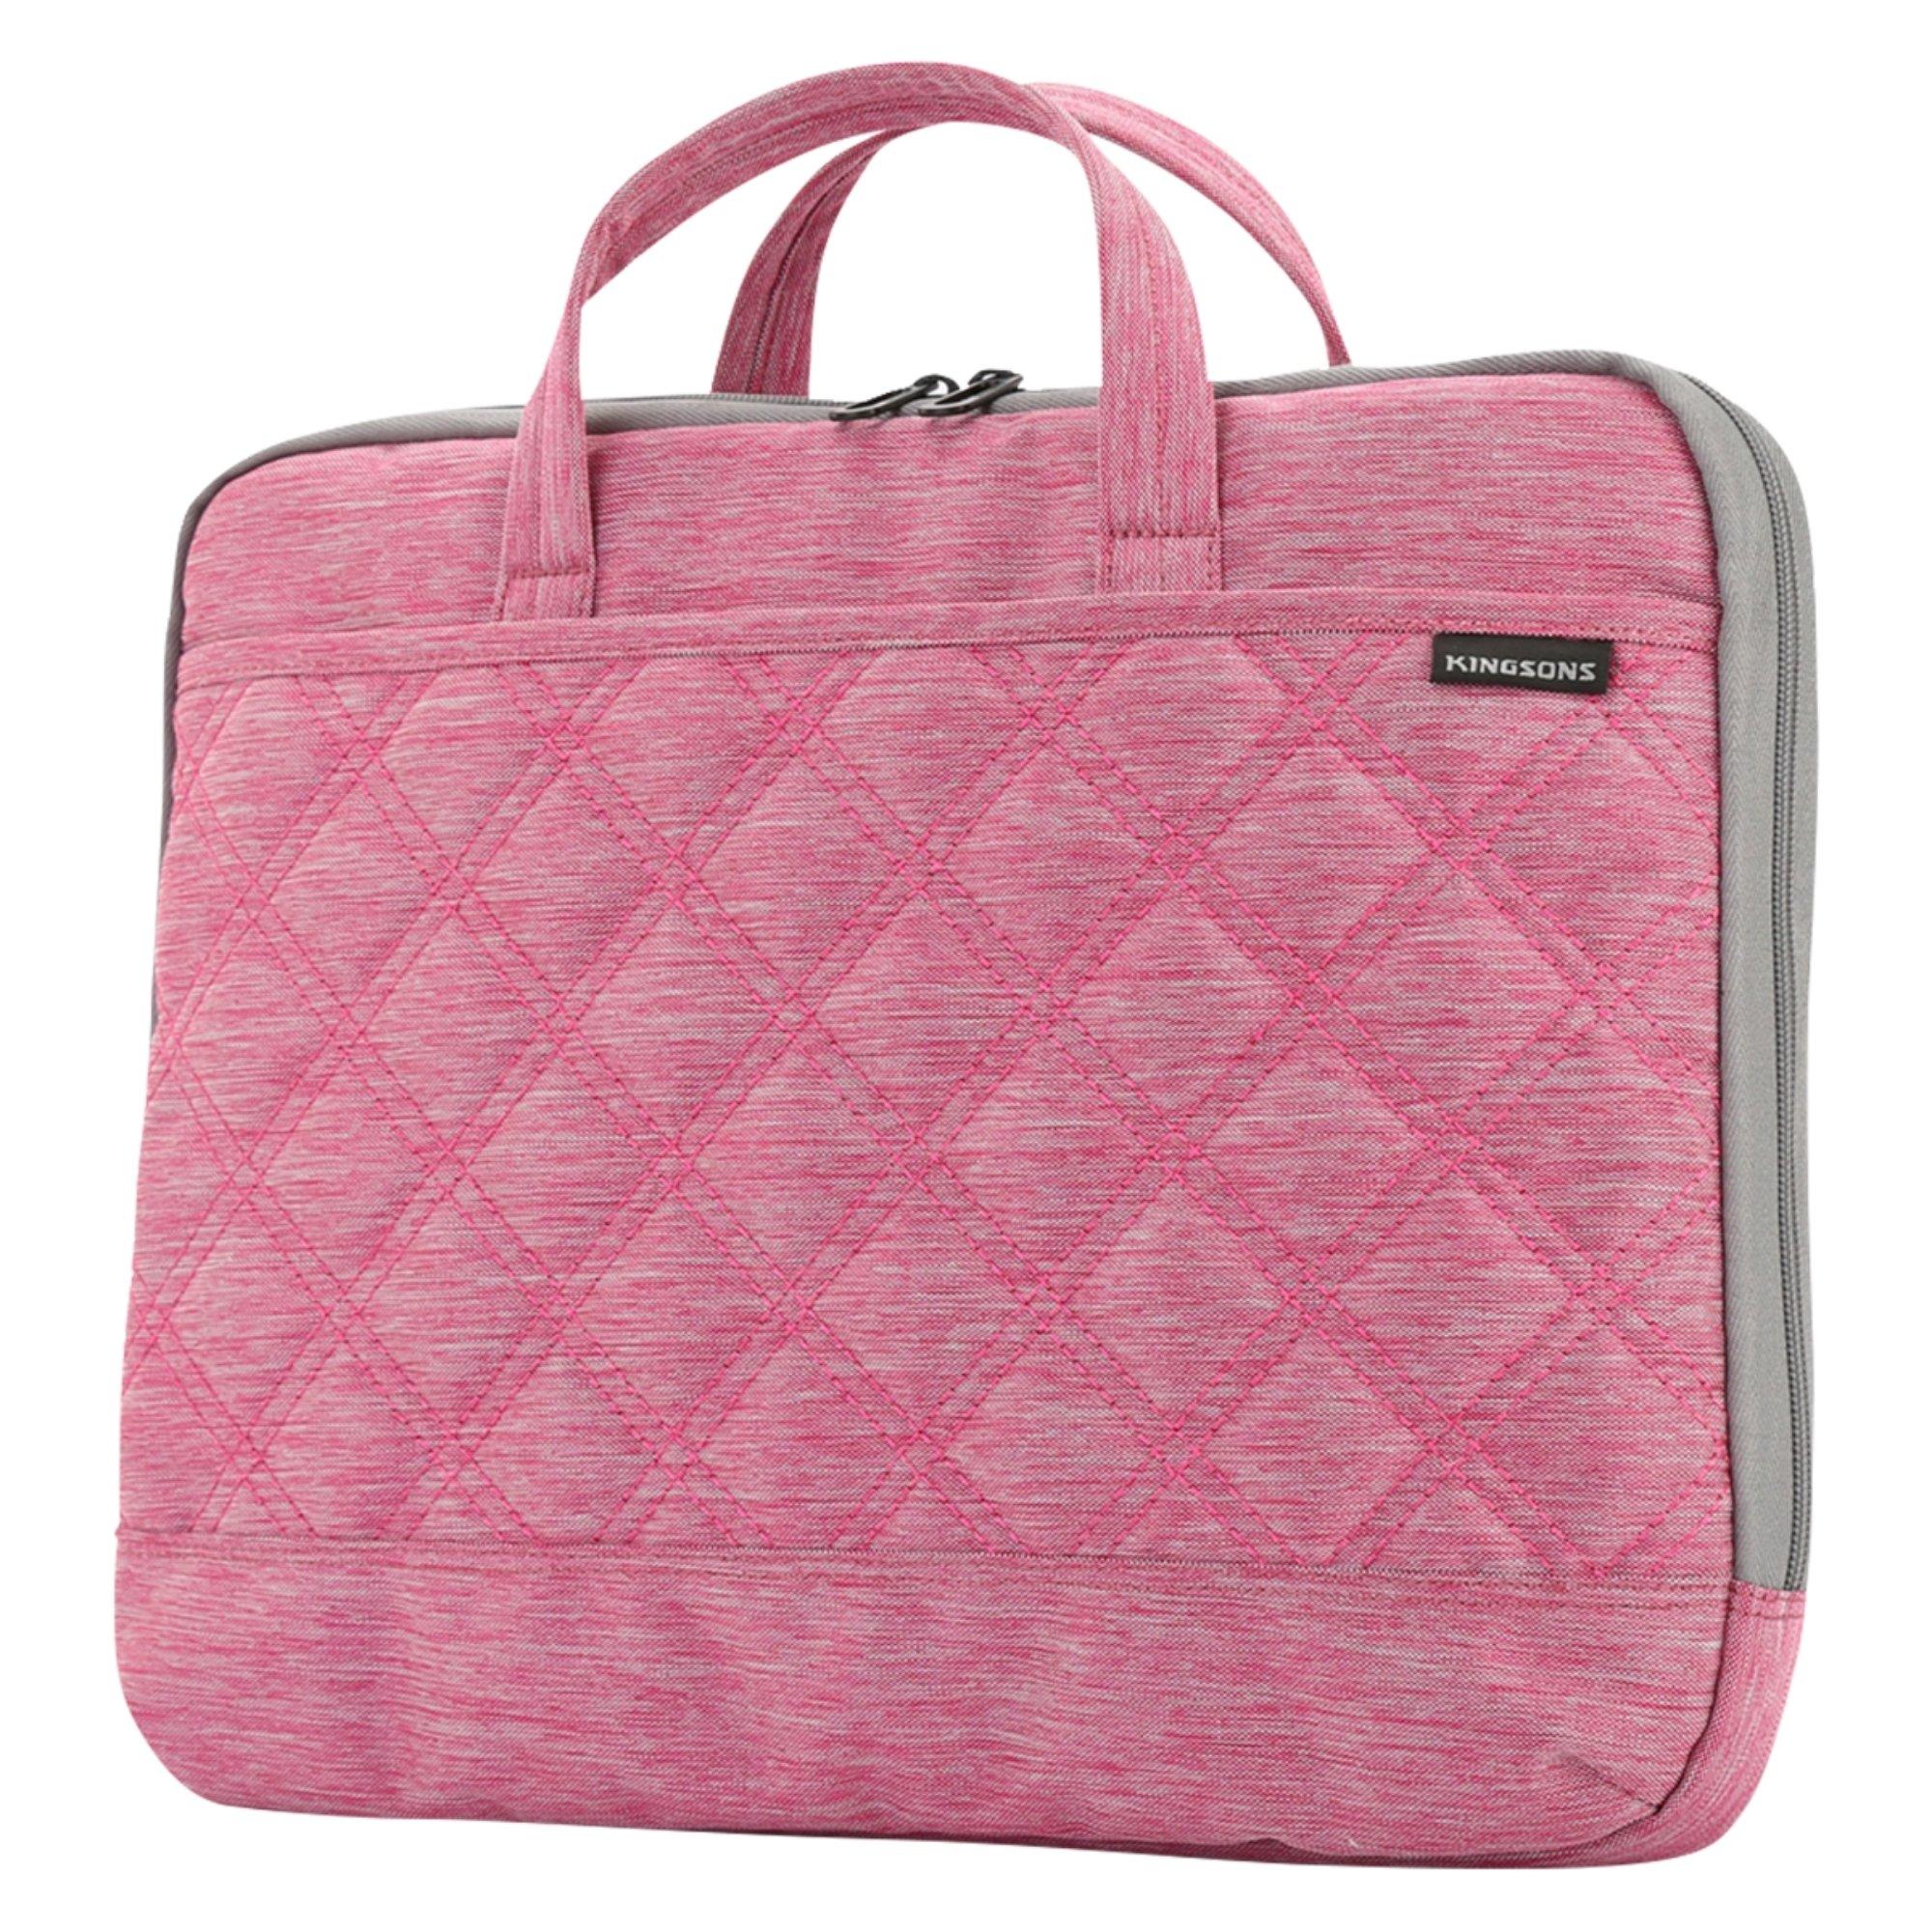 list item 1 of 4 Kingsons Trace Series Womens Laptop Bag Pink